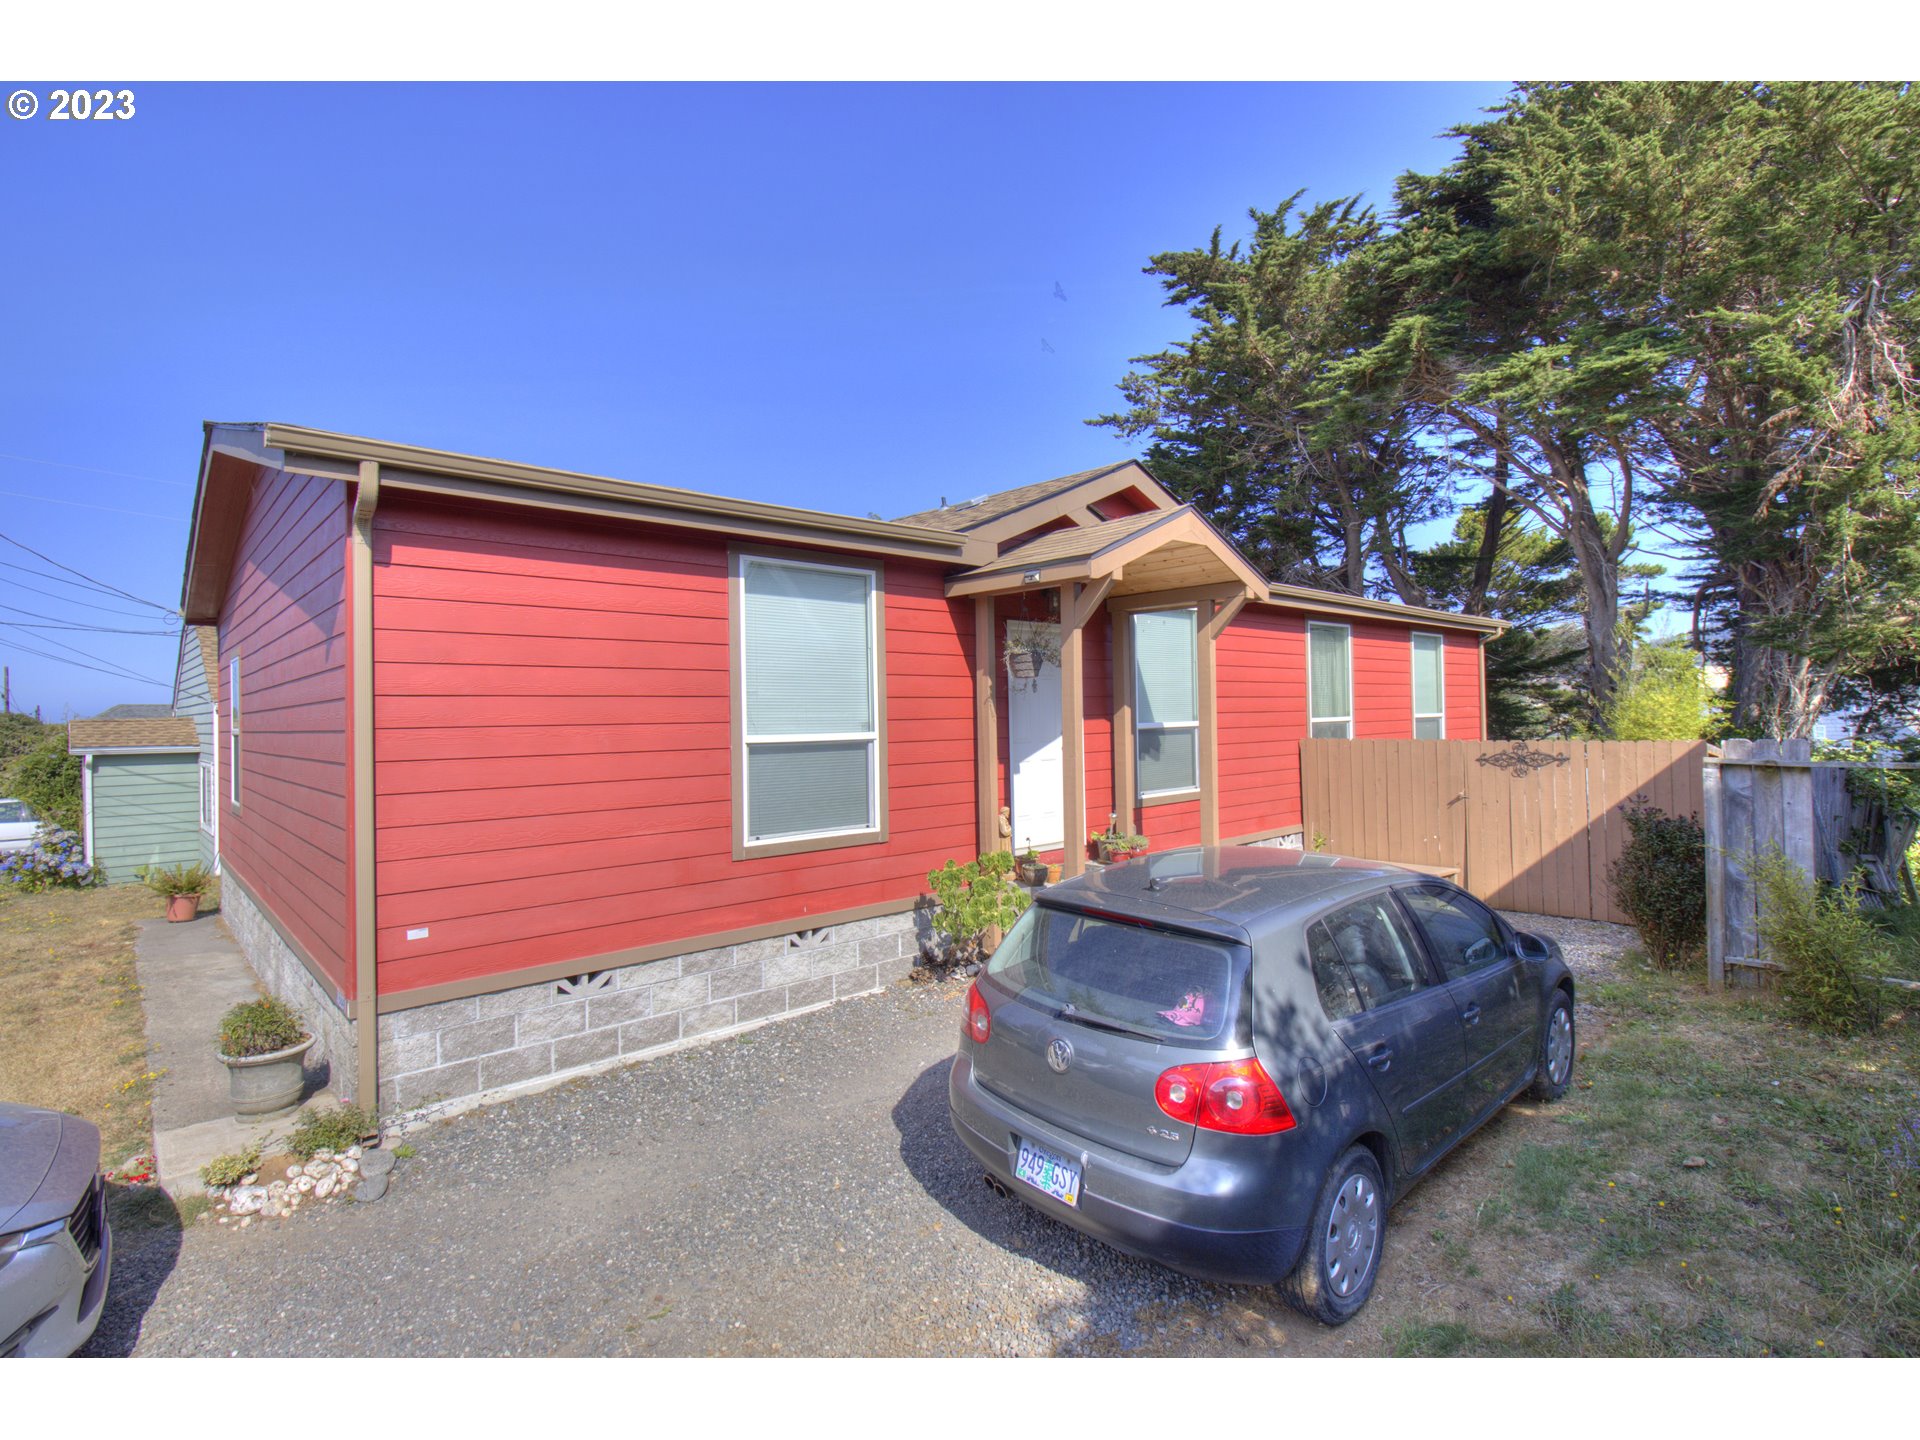 94223 1ST ST Gold Beach, Brookings Home Listings - Pacific Coastal Real Estate